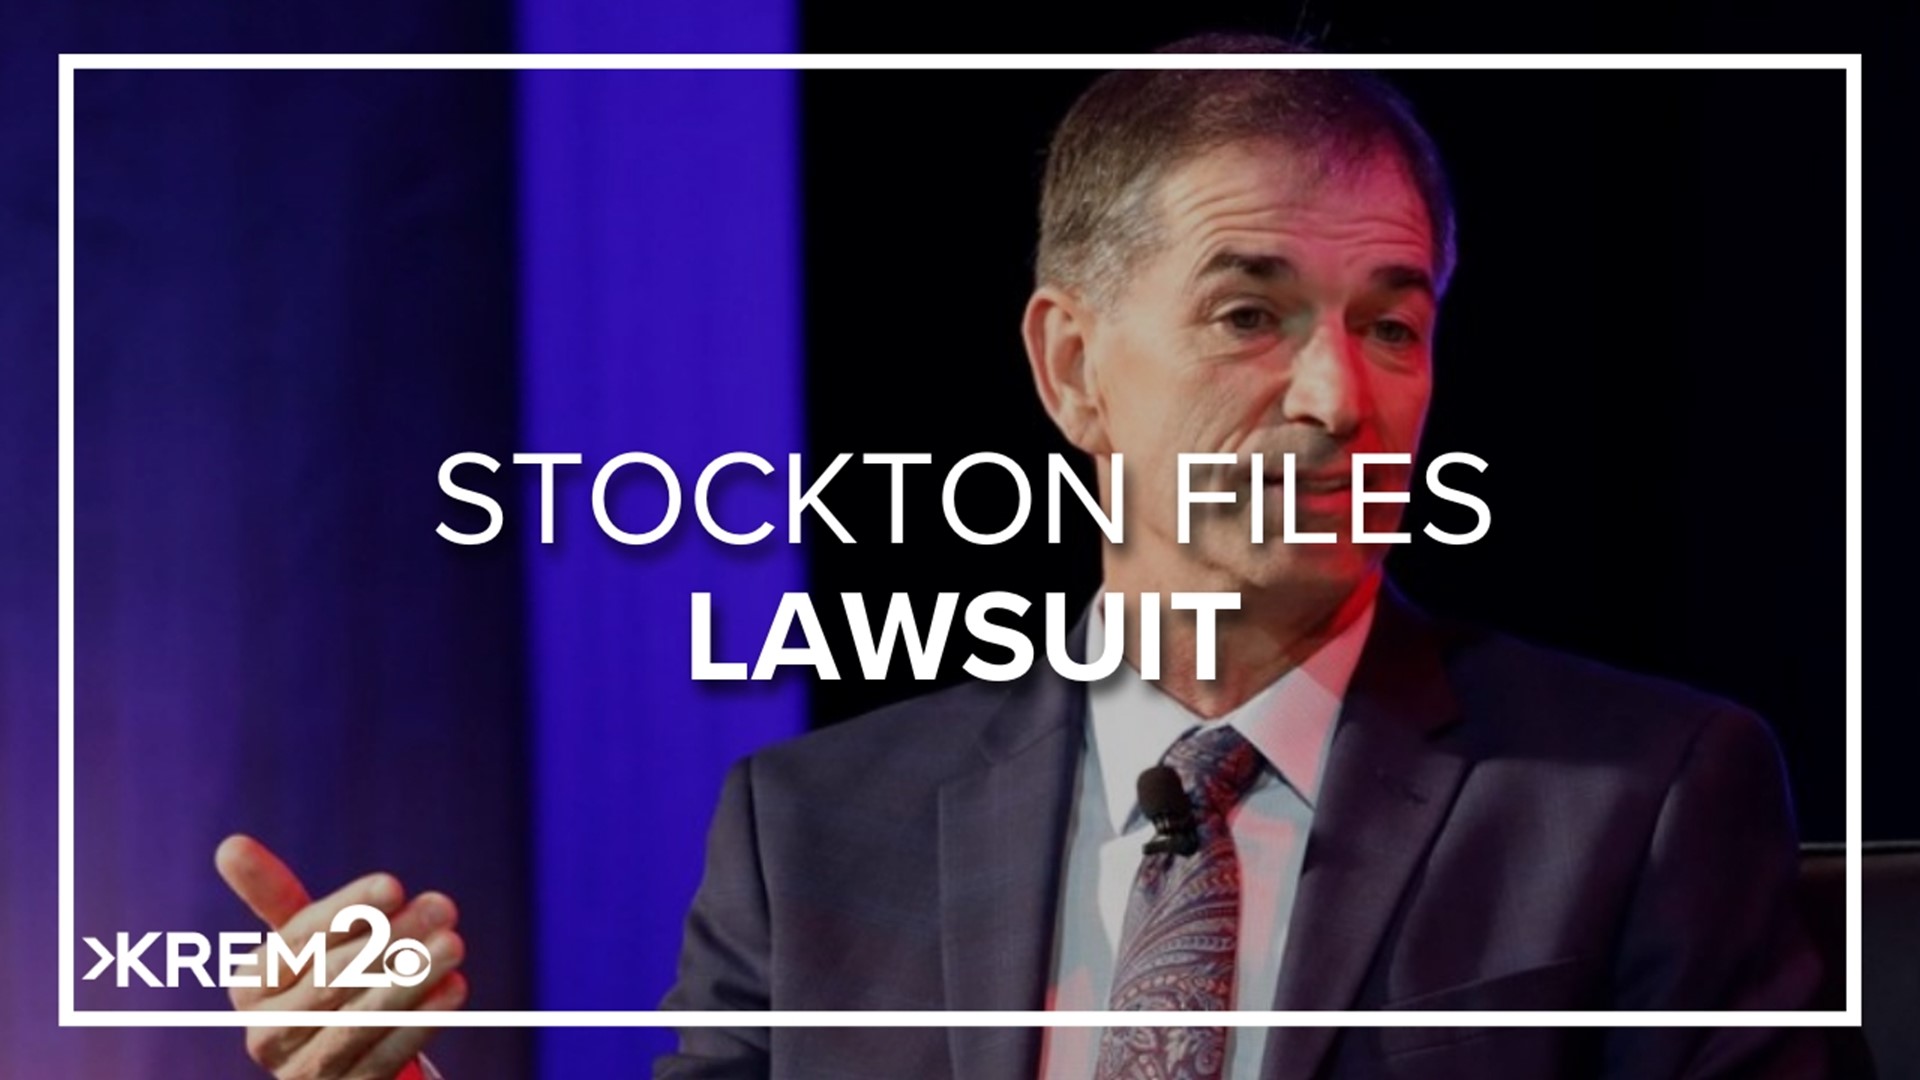 Stockton joined several medical professionals in the lawsuit against Attorney General Bob Ferguson and Washington Medical Commission Executive Director Kyle Karinen.